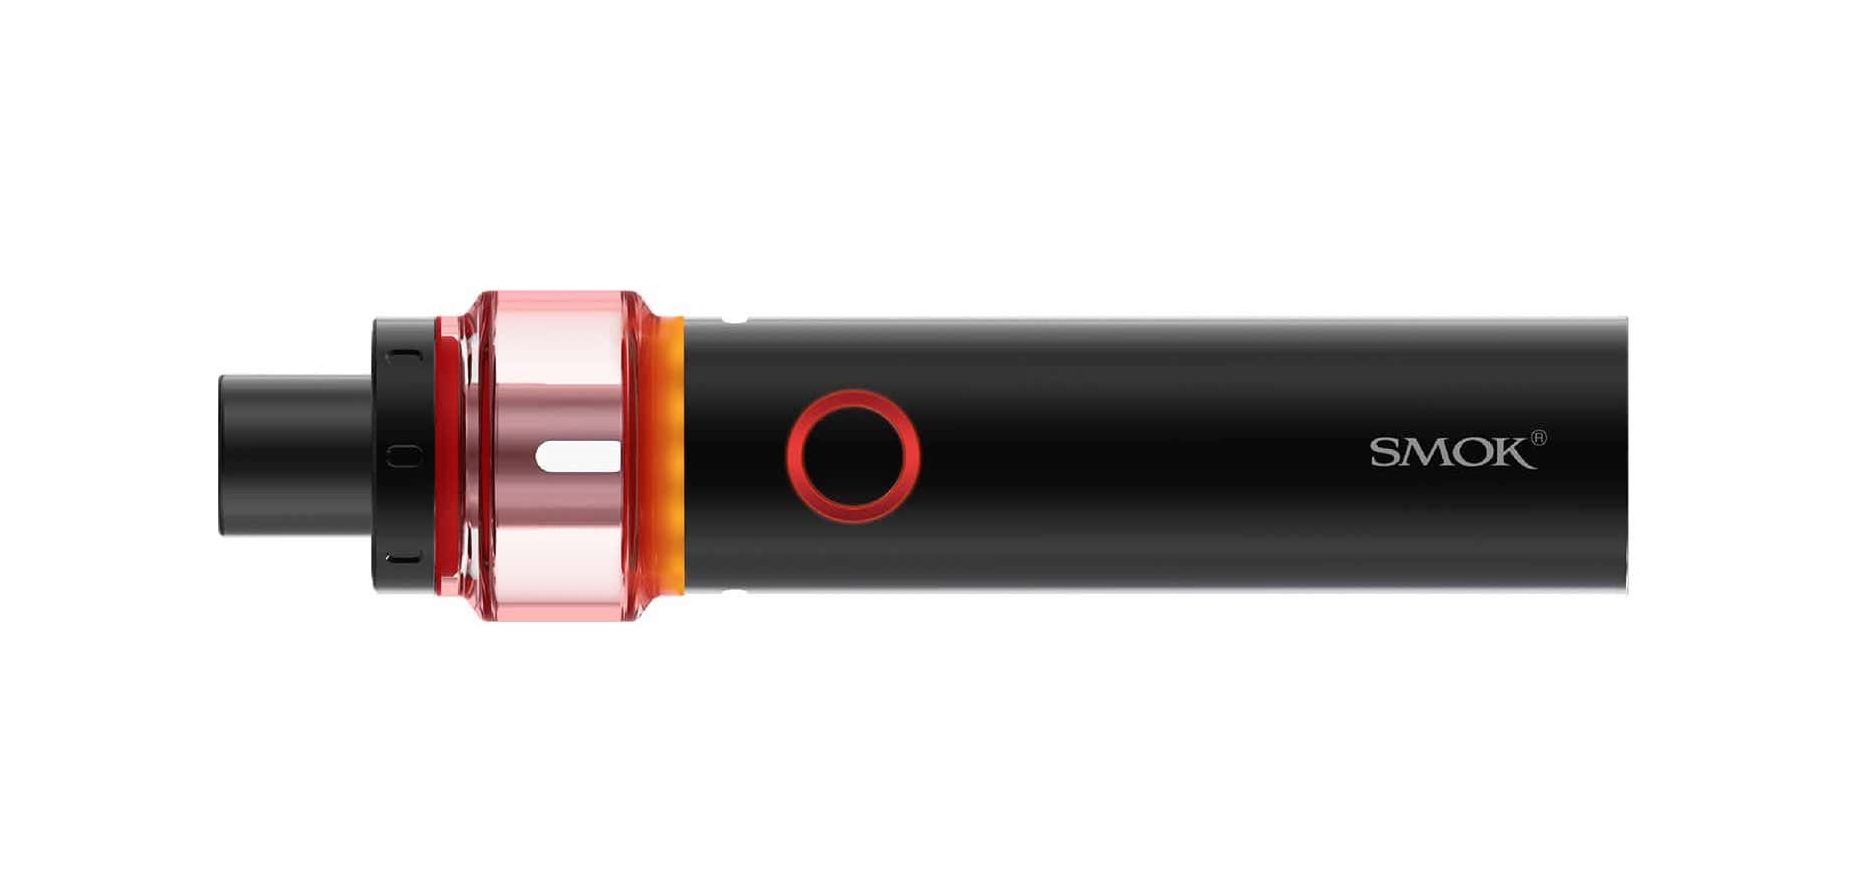 SMOK Vape Pen 22 Review: Is It Worth Your Money?